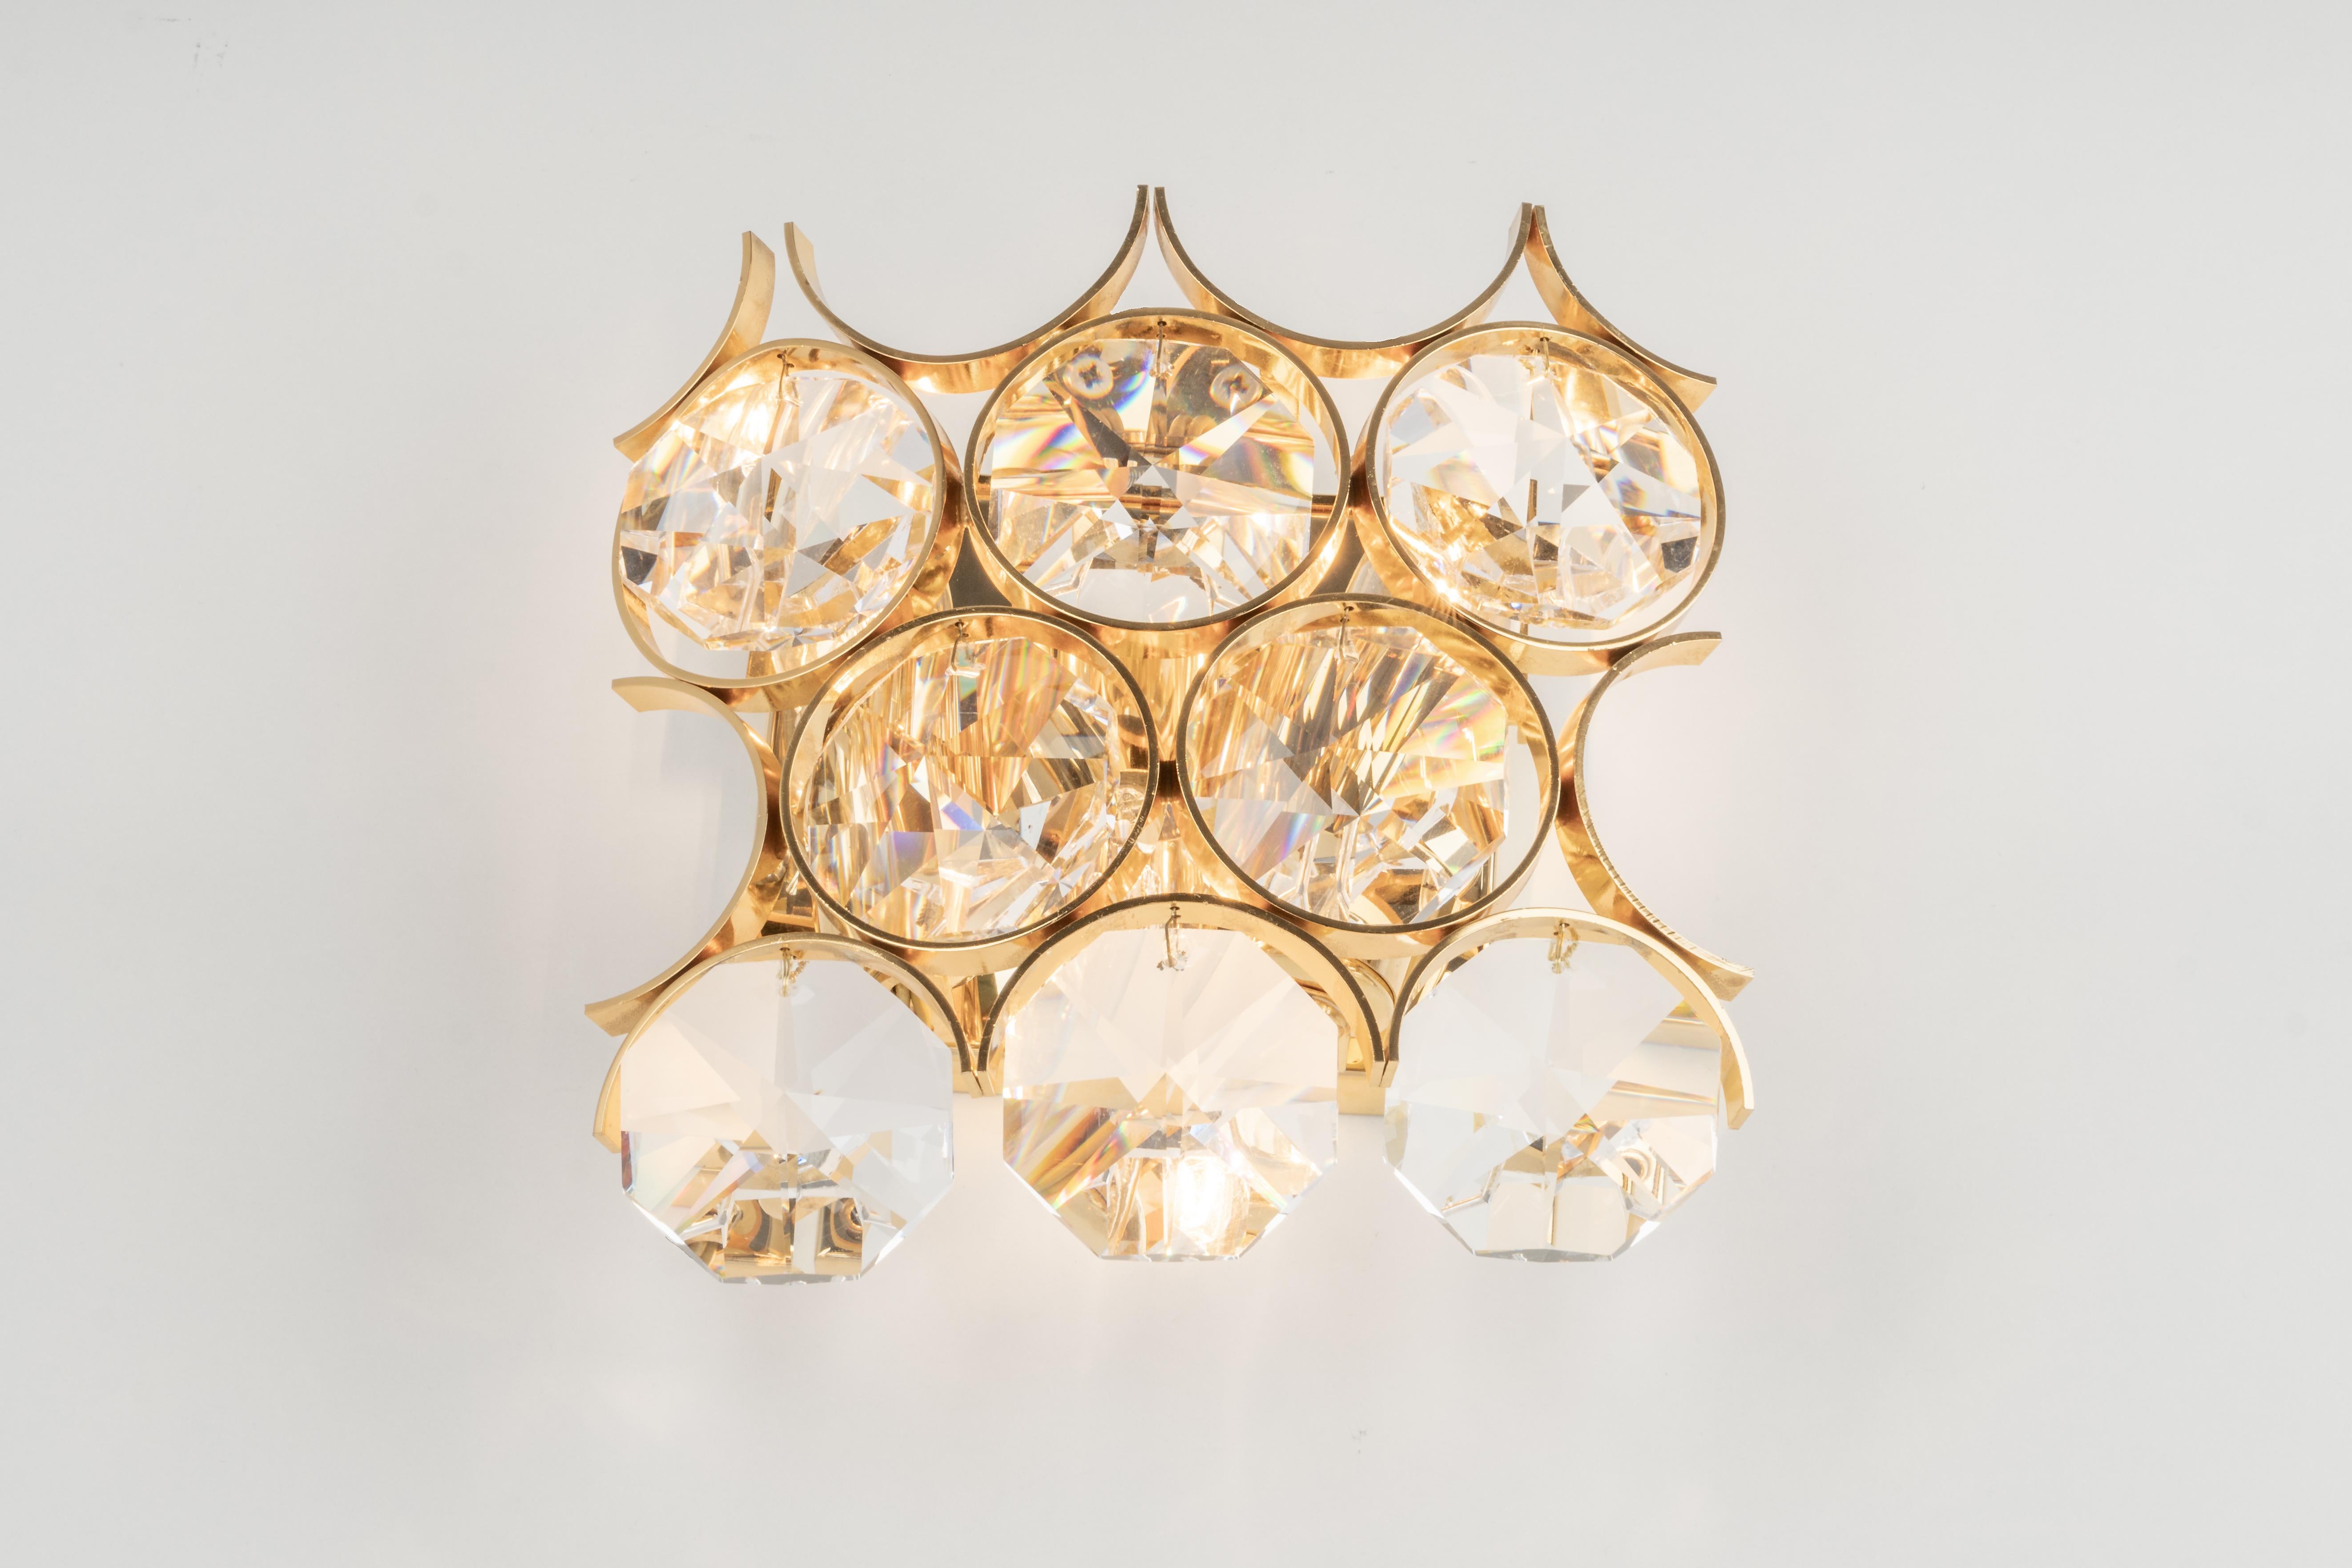 1 of 2 Pairs of Crystal Wall Lights, Sciolari Design, Palwa, Germany, 1960s For Sale 1